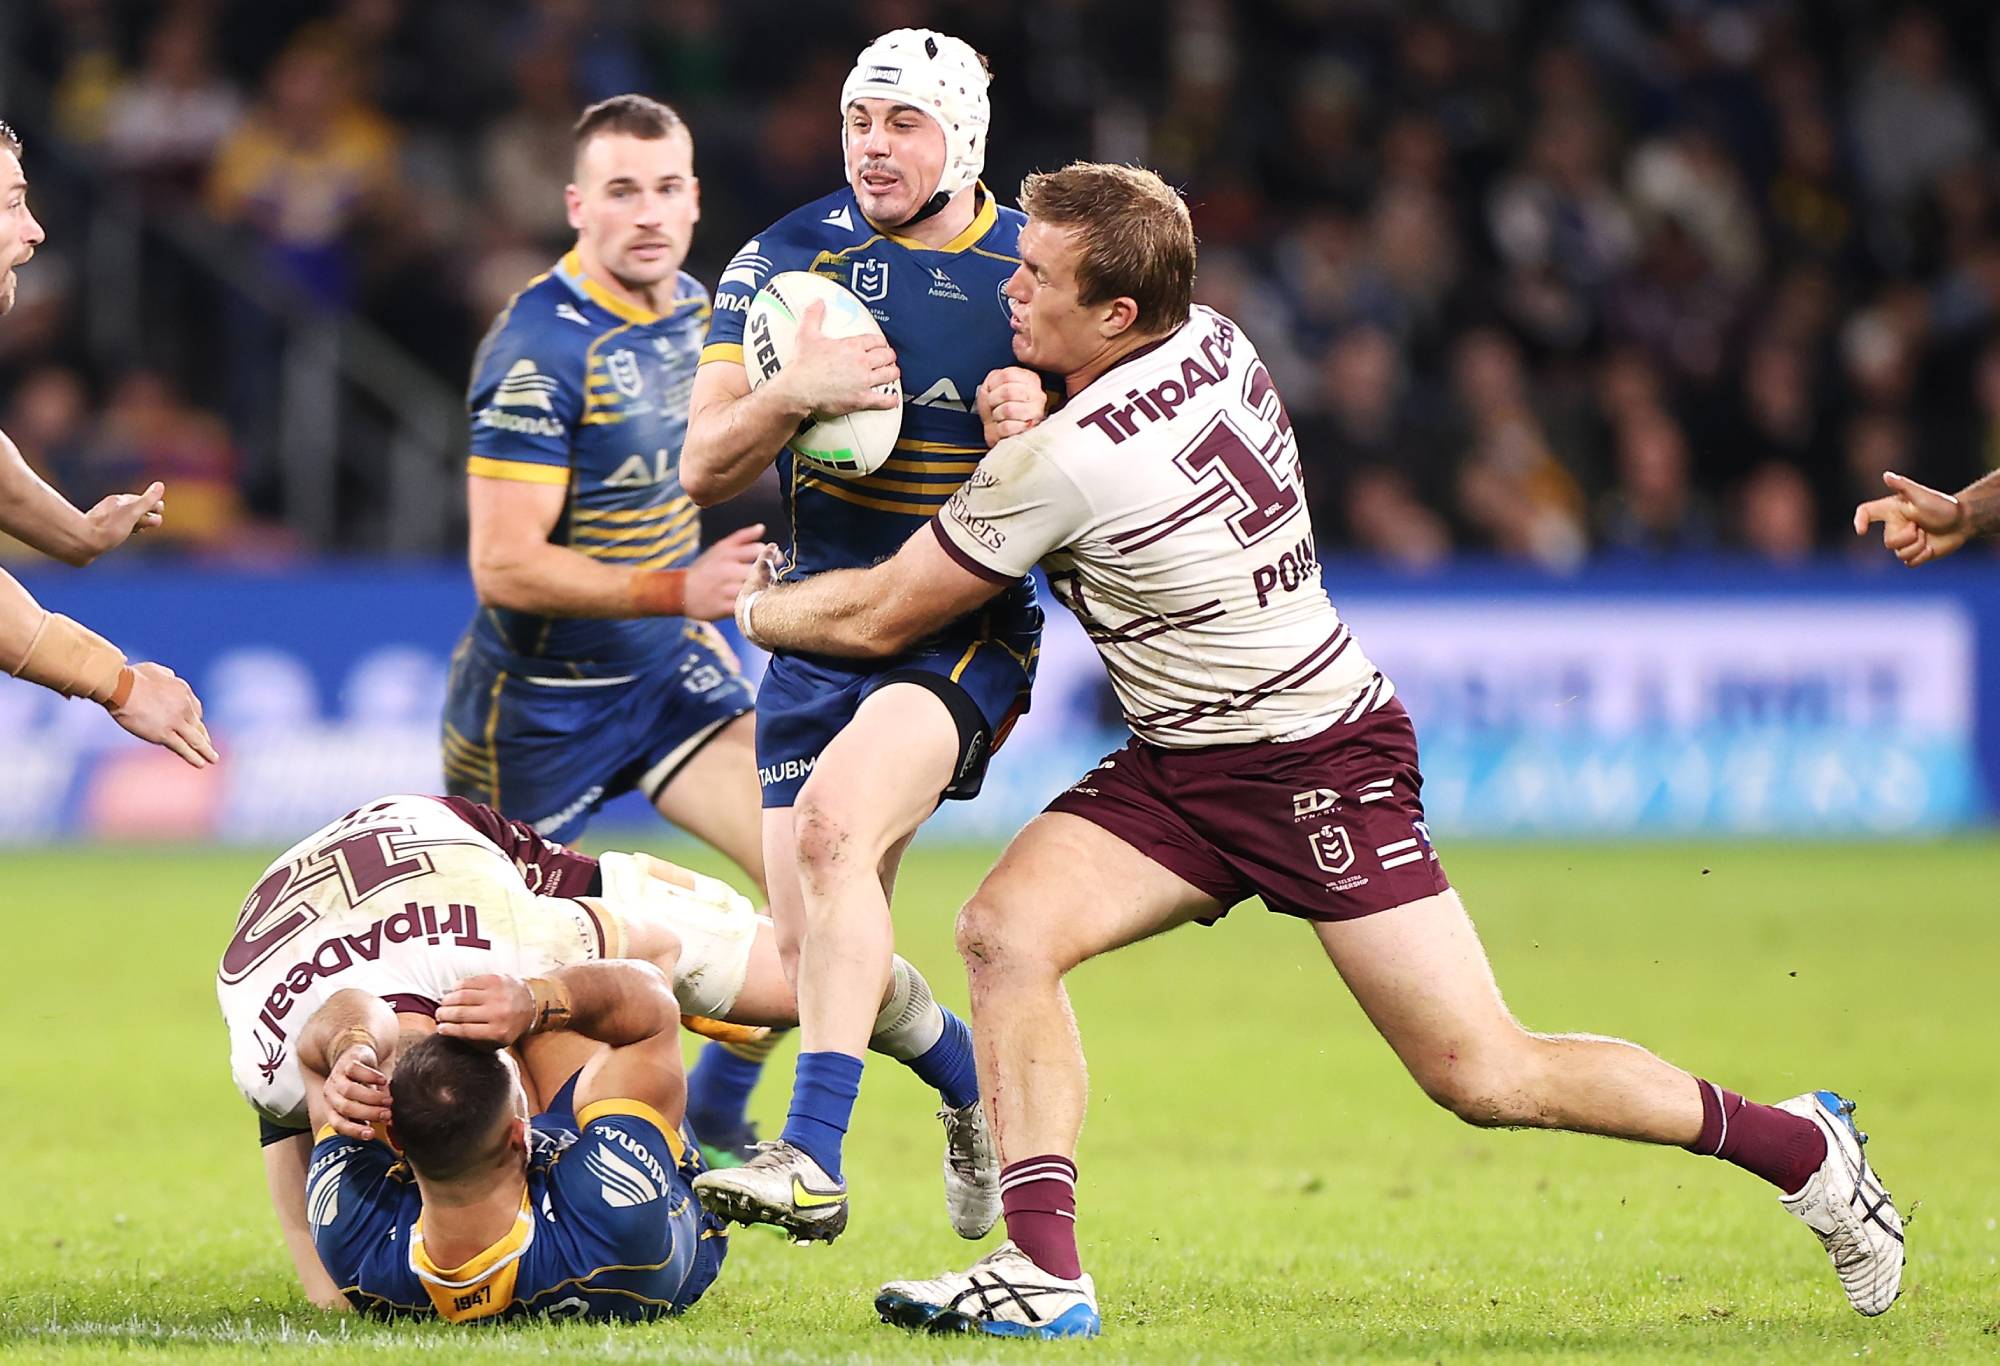 SYDNEY, AUSTRALIA - MAY 20: Reed Mahoney of the Eels is tackled by Jake Trbojevic of the Sea Eagles during the round 11 NRL match between the Parramatta Eels and the Manly Sea Eagles at CommBank Stadium, on May 20, 2022, in Sydney, Australia. (Photo by Mark Kolbe/Getty Images)